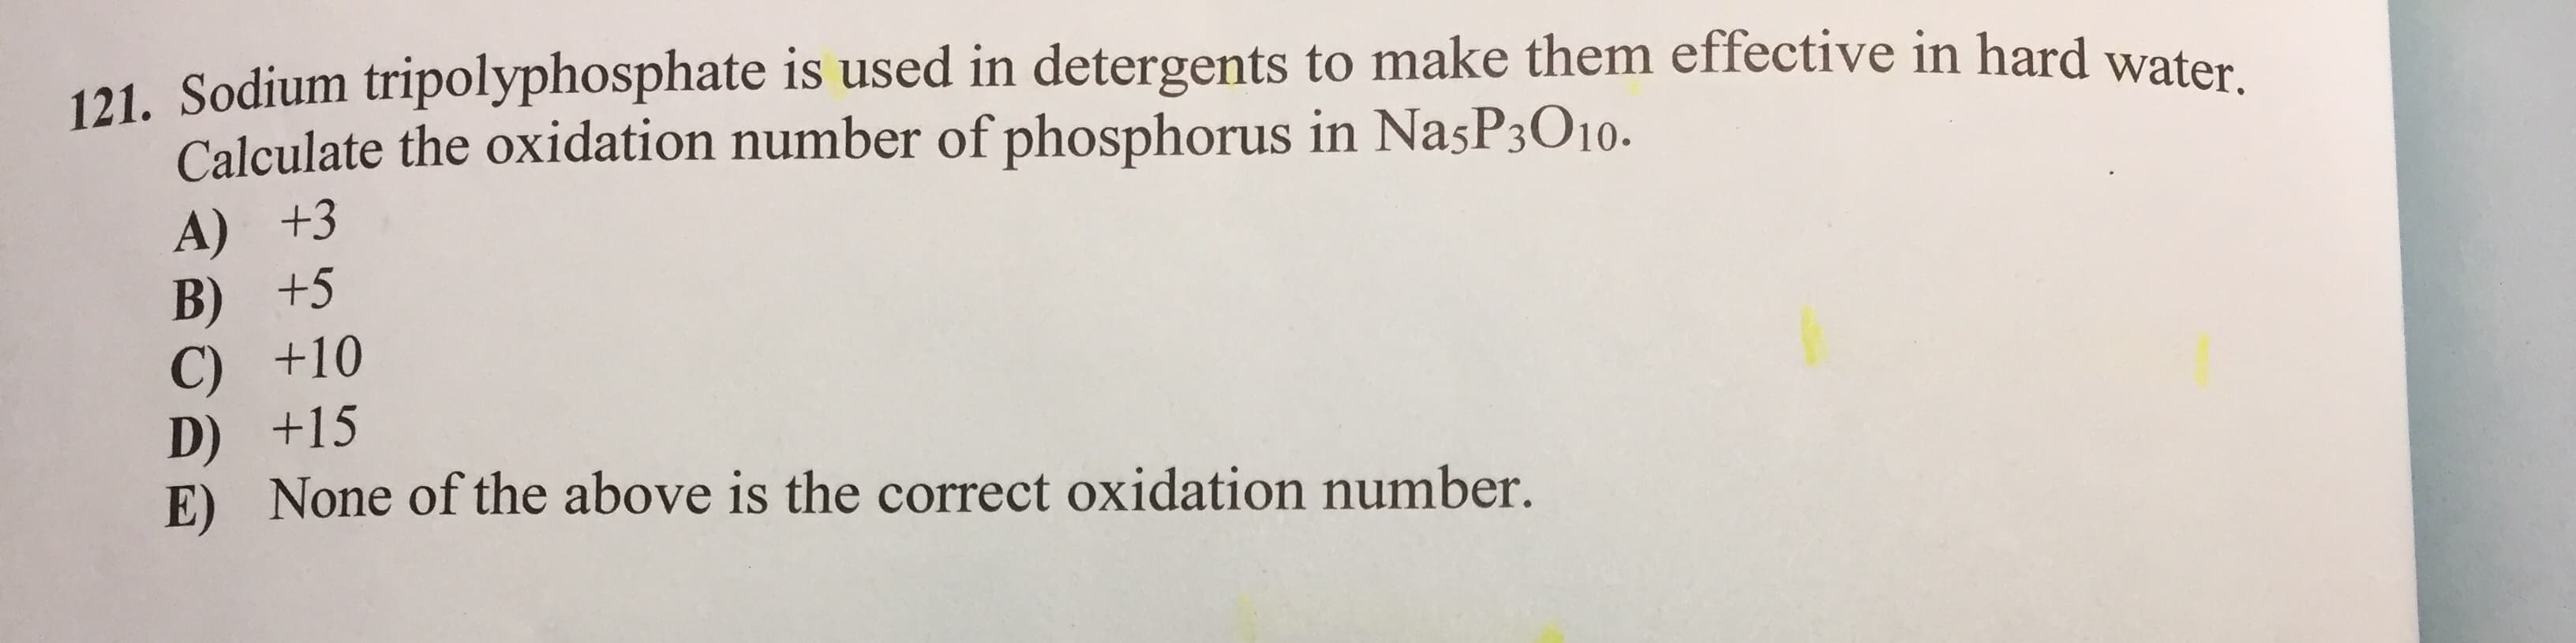 121. Sodium tripolyphosphate is used in detergents to make them effective in hard waten
Calculate the oxidation number of phosphorus in NasP3O10.
A) +3
B) +5
C) +10
D) +15
E) None of the above is the correct oxidation number.
